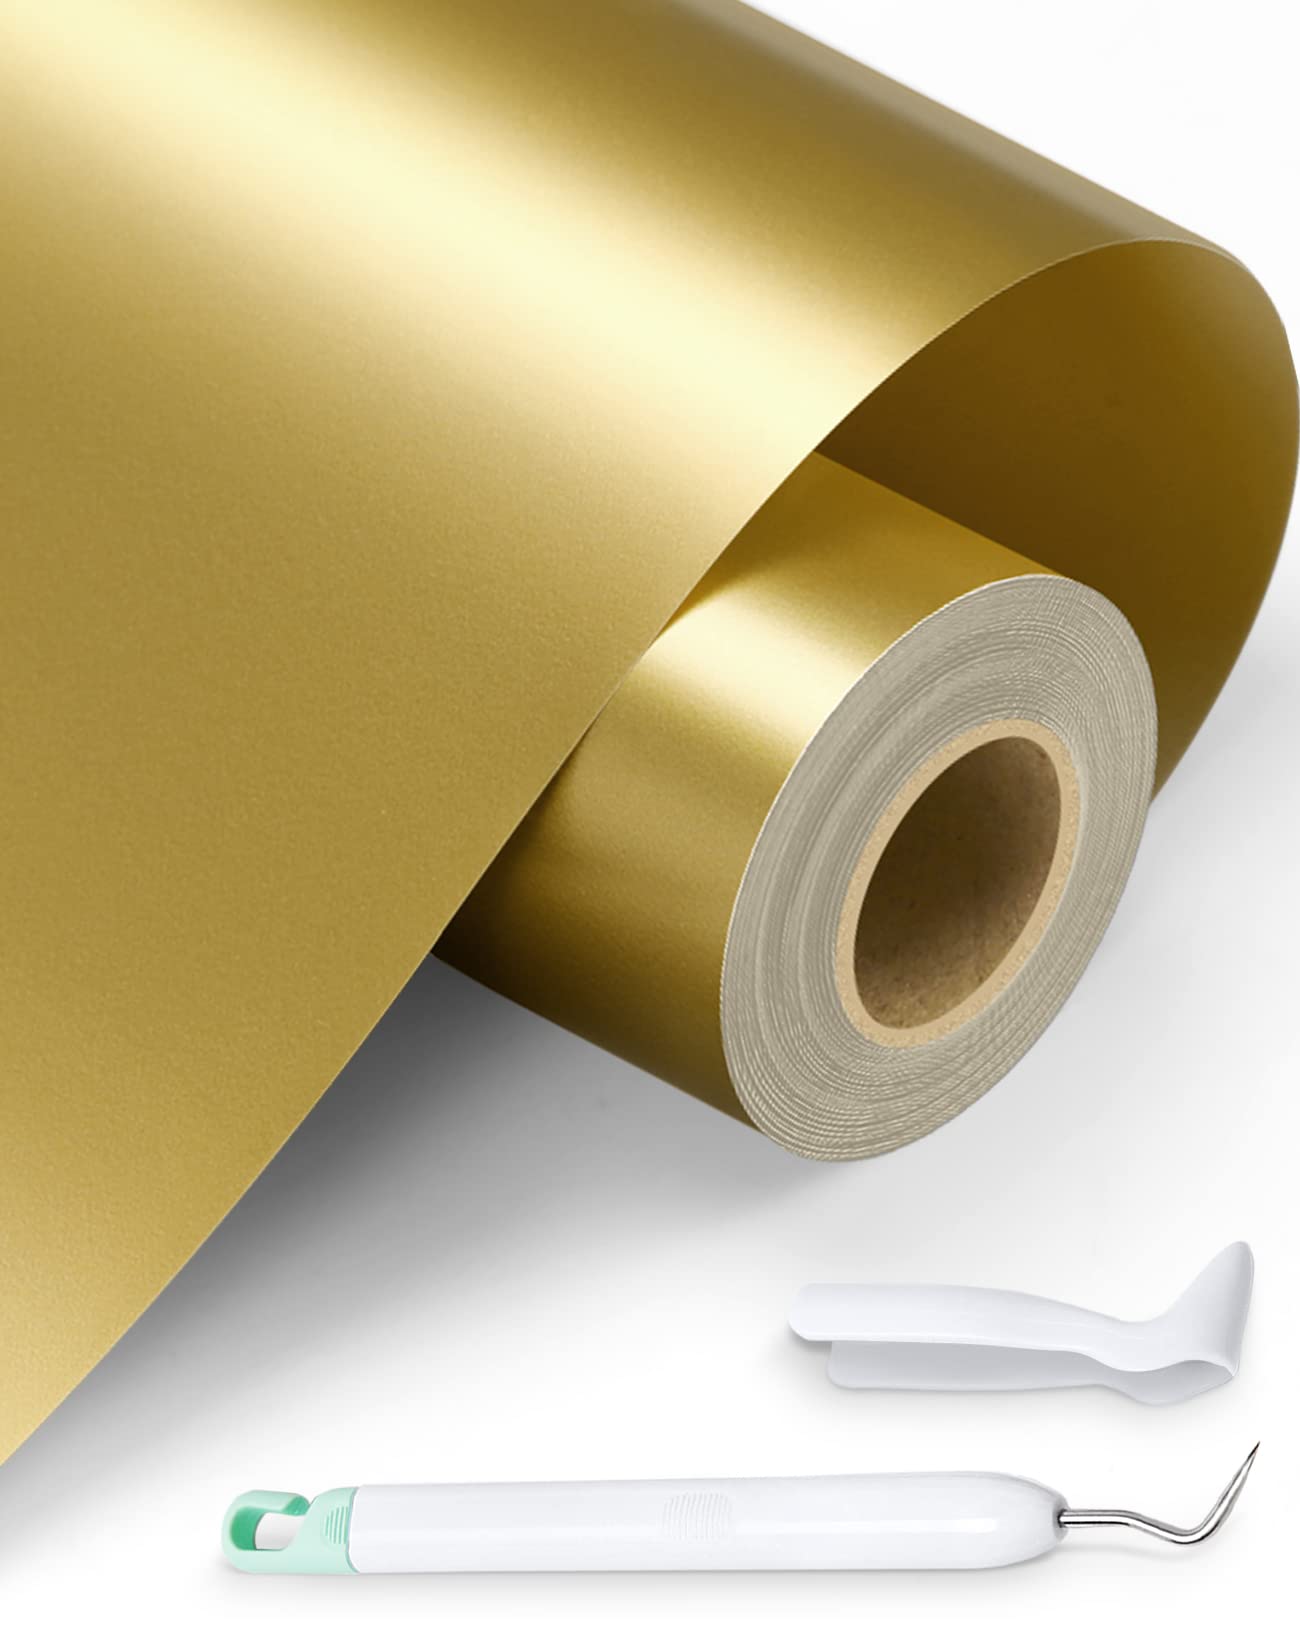 Sooez gold Permanent Vinyl - 12 x 13FT gold Adhesive Vinyl Roll for cricut  Silhouette cameo, Hook Weeder Included, Permanent O